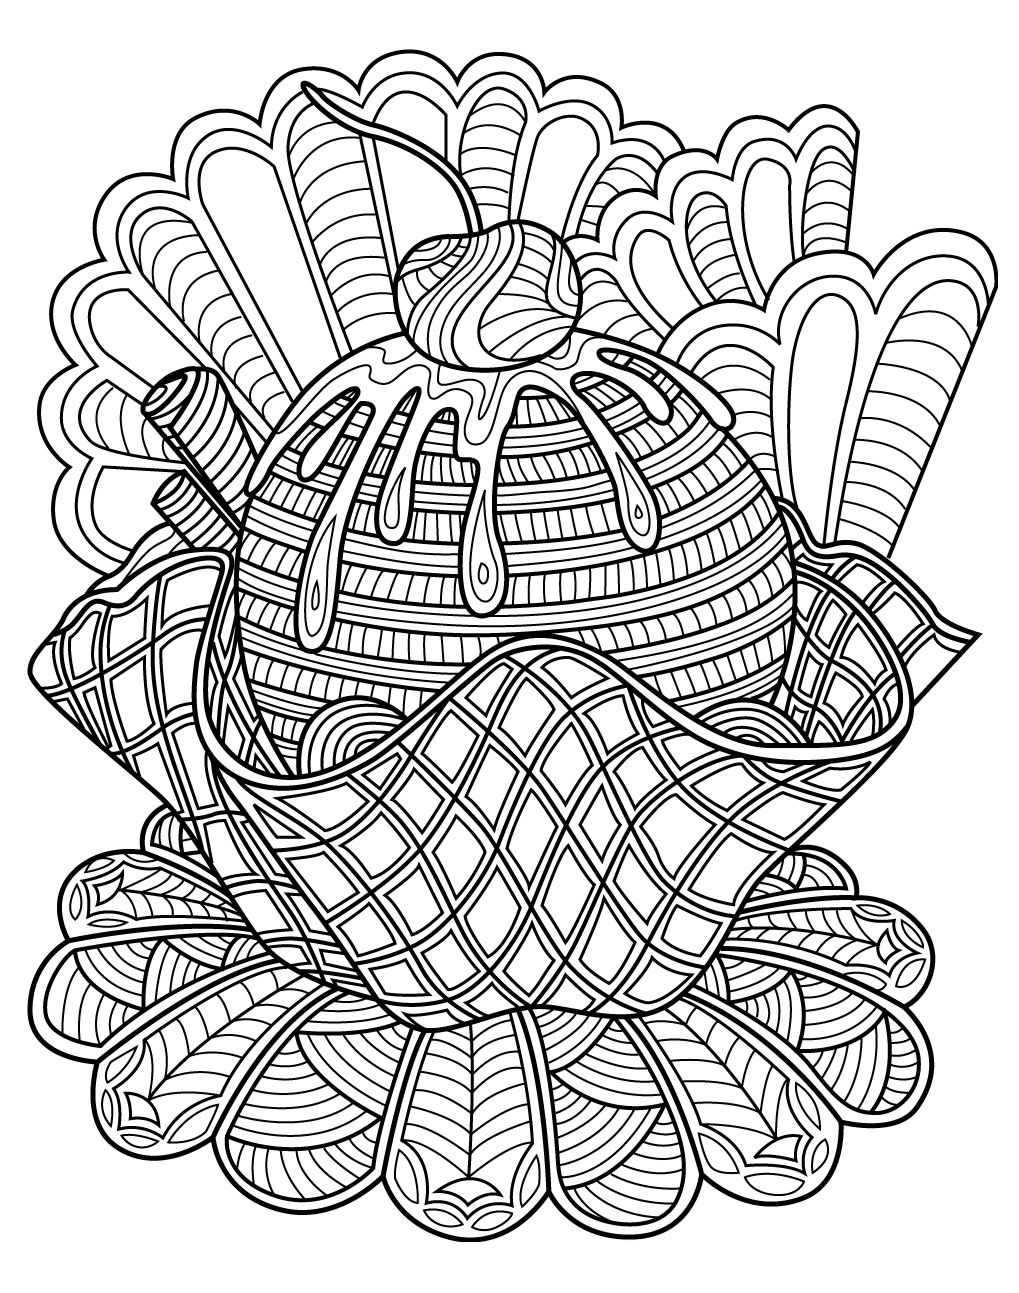 Sweets Coloring Pages at GetColorings.com | Free printable colorings